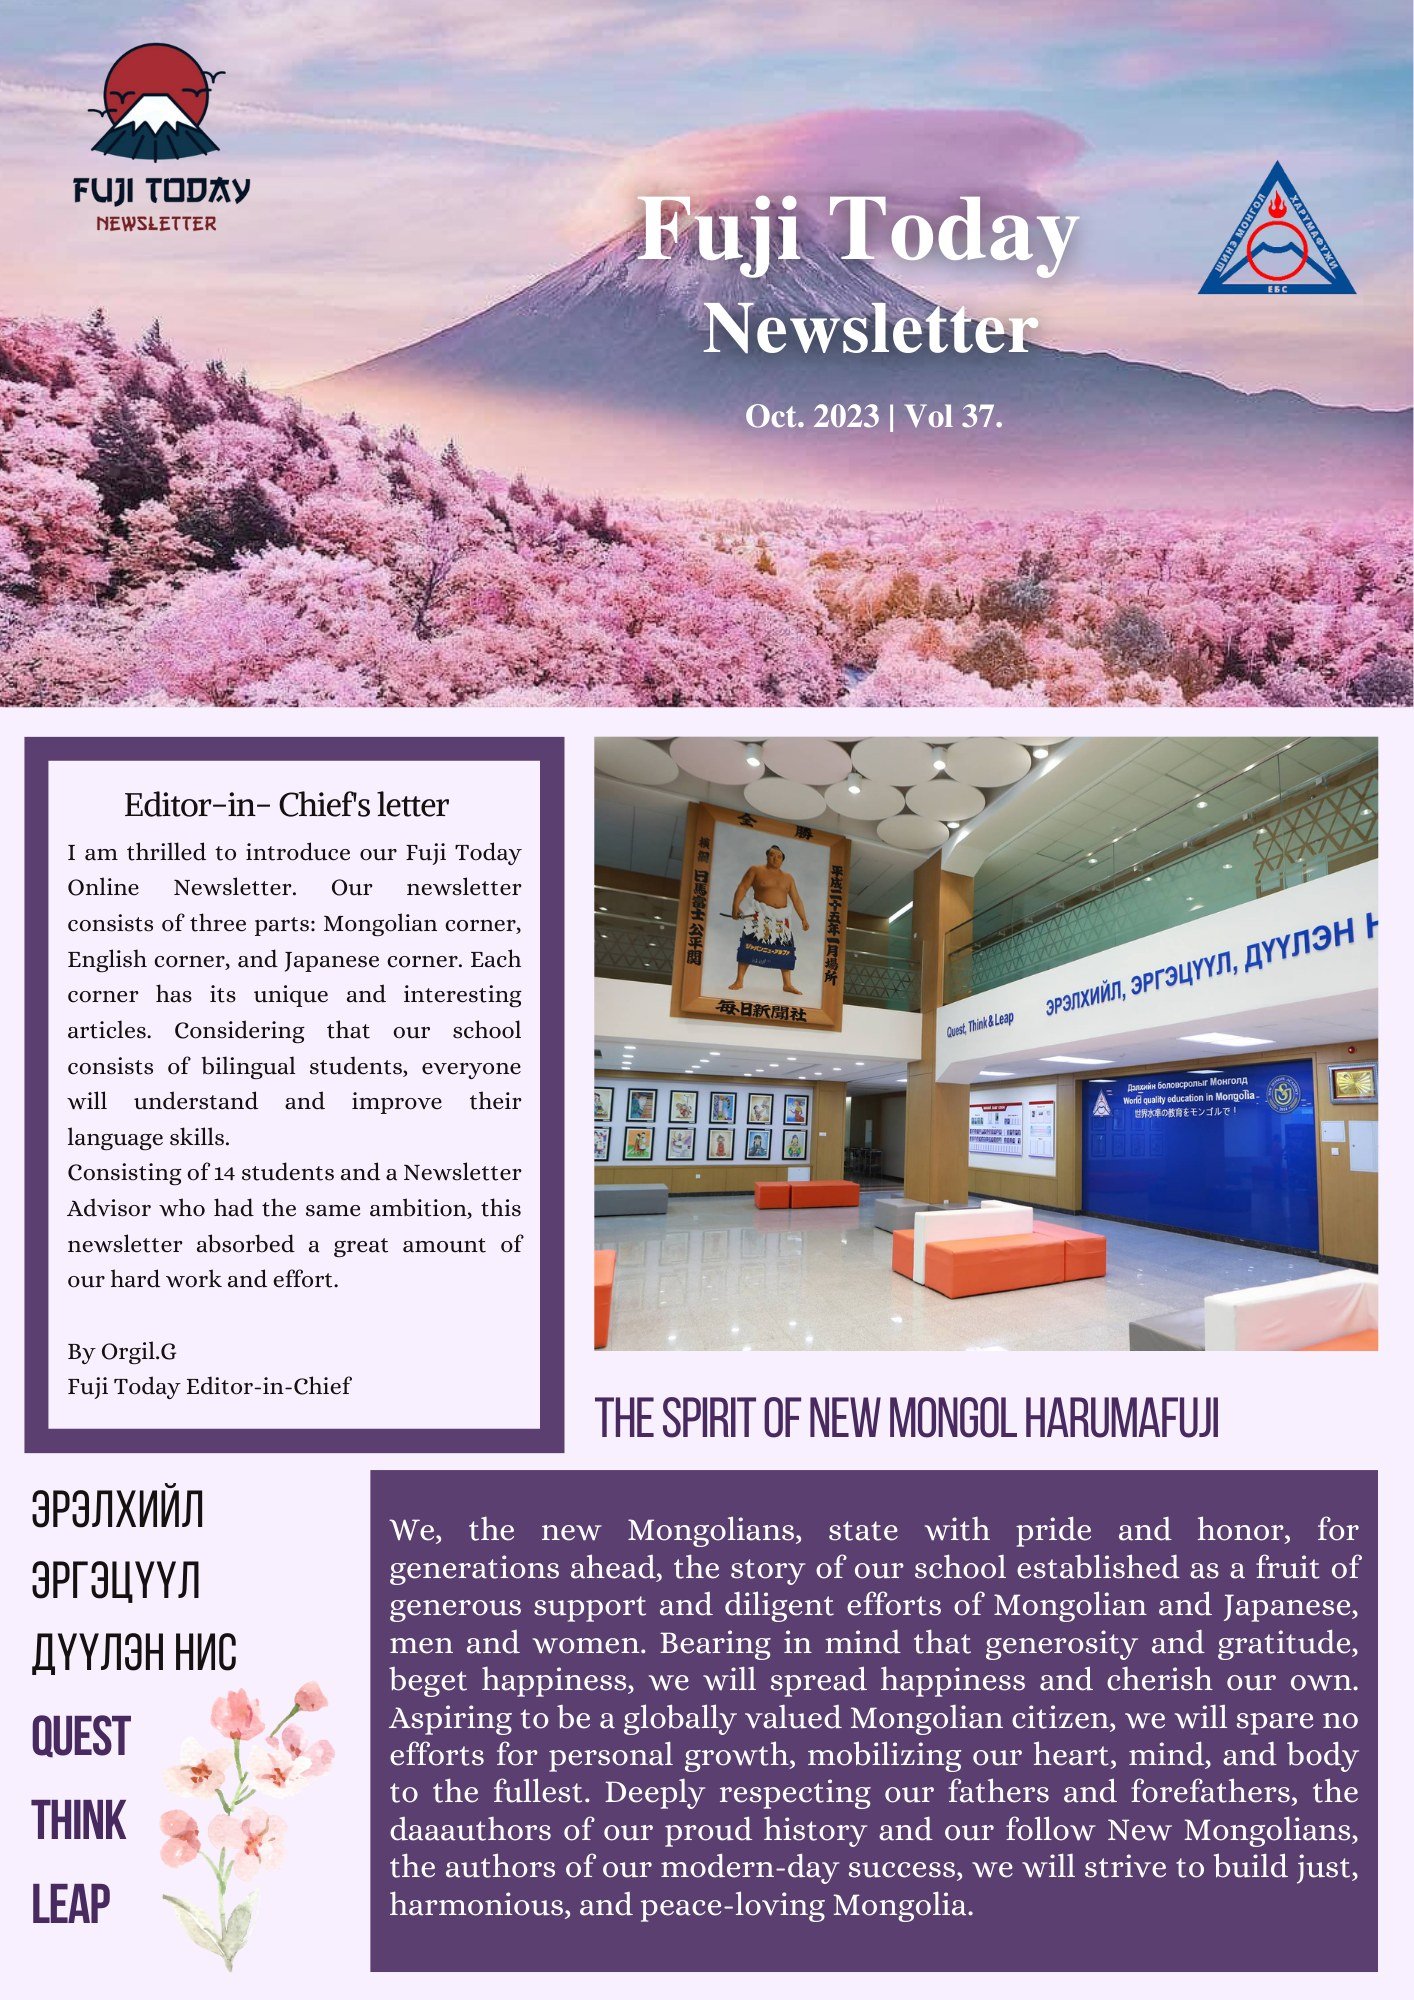 Fuji Today Newsletter